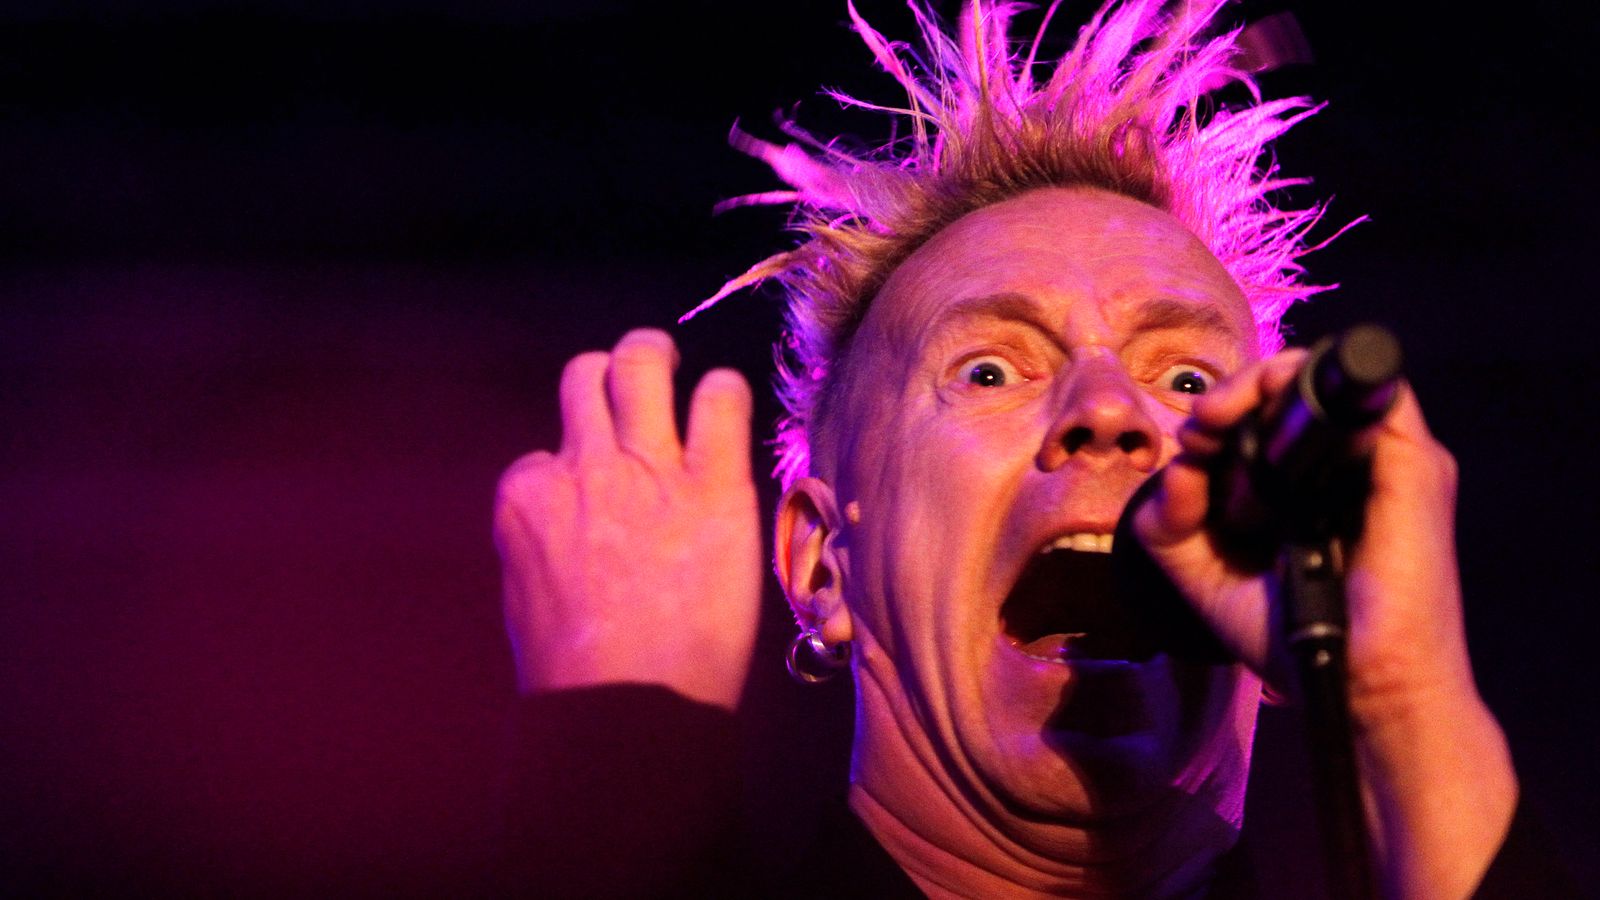 Eurovision: Former Sex Pistols' frontman John Lydon fails to win place representing Ireland